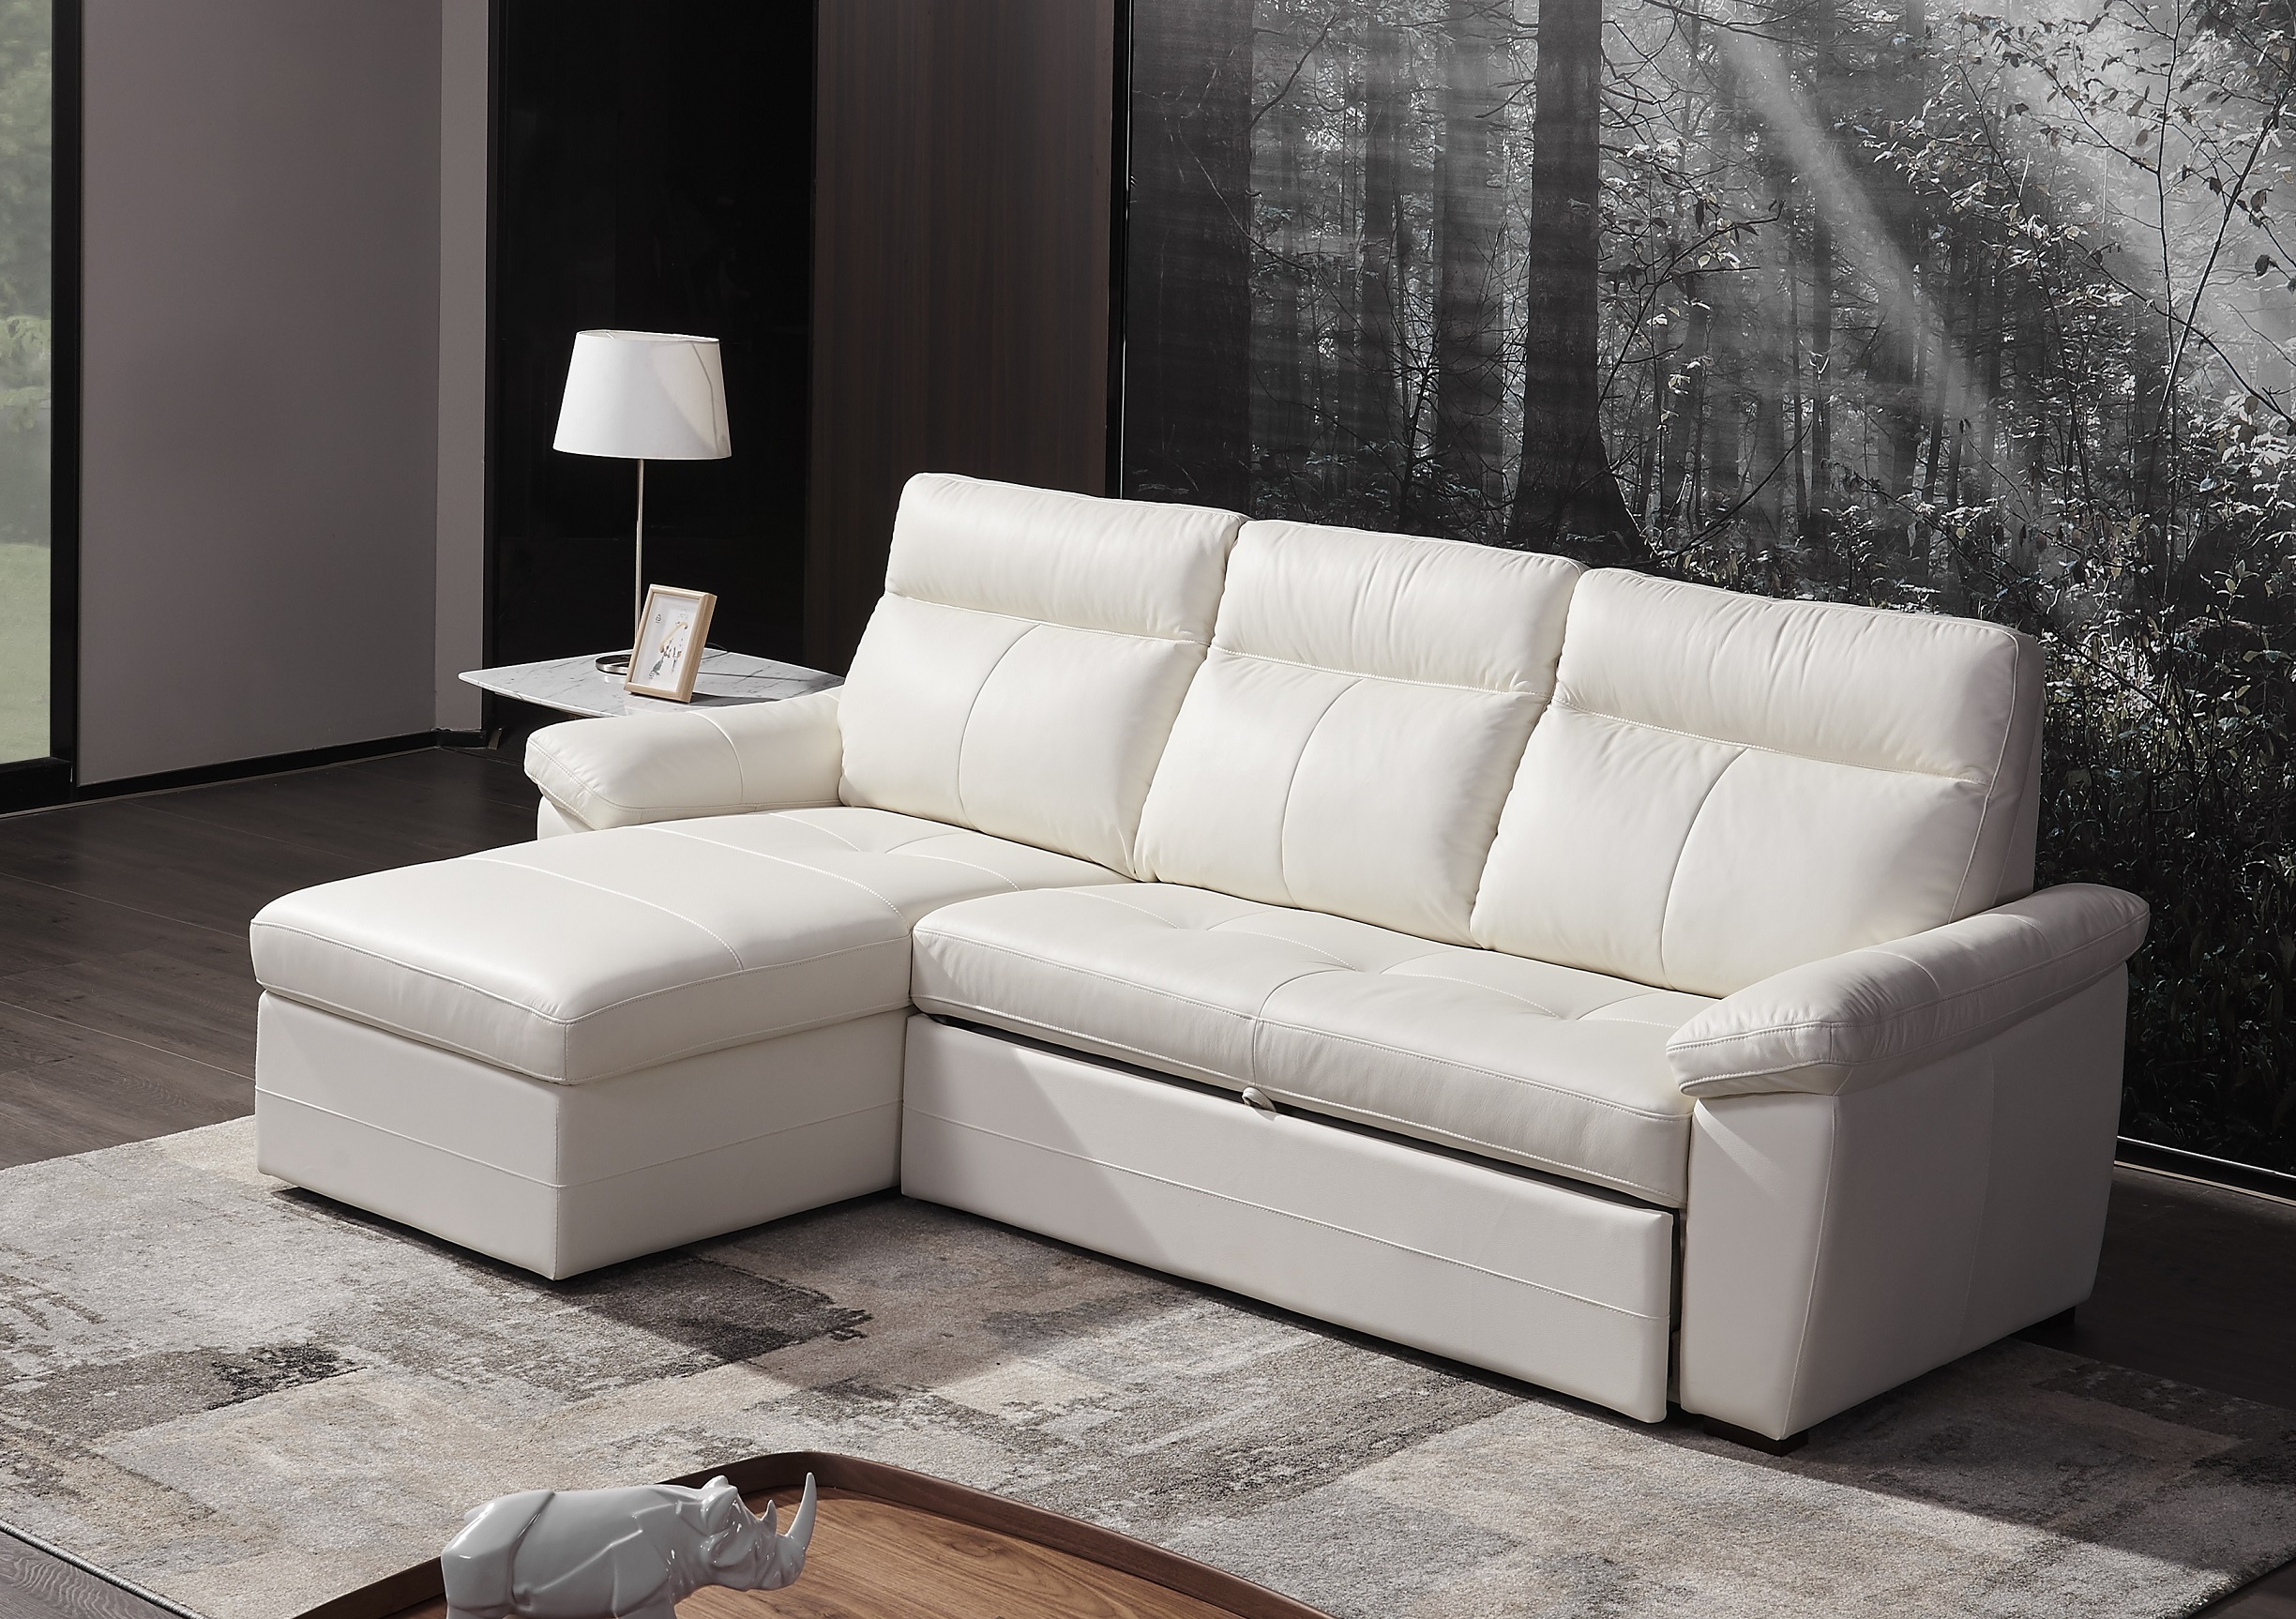 leather couch sofa bed removable arms